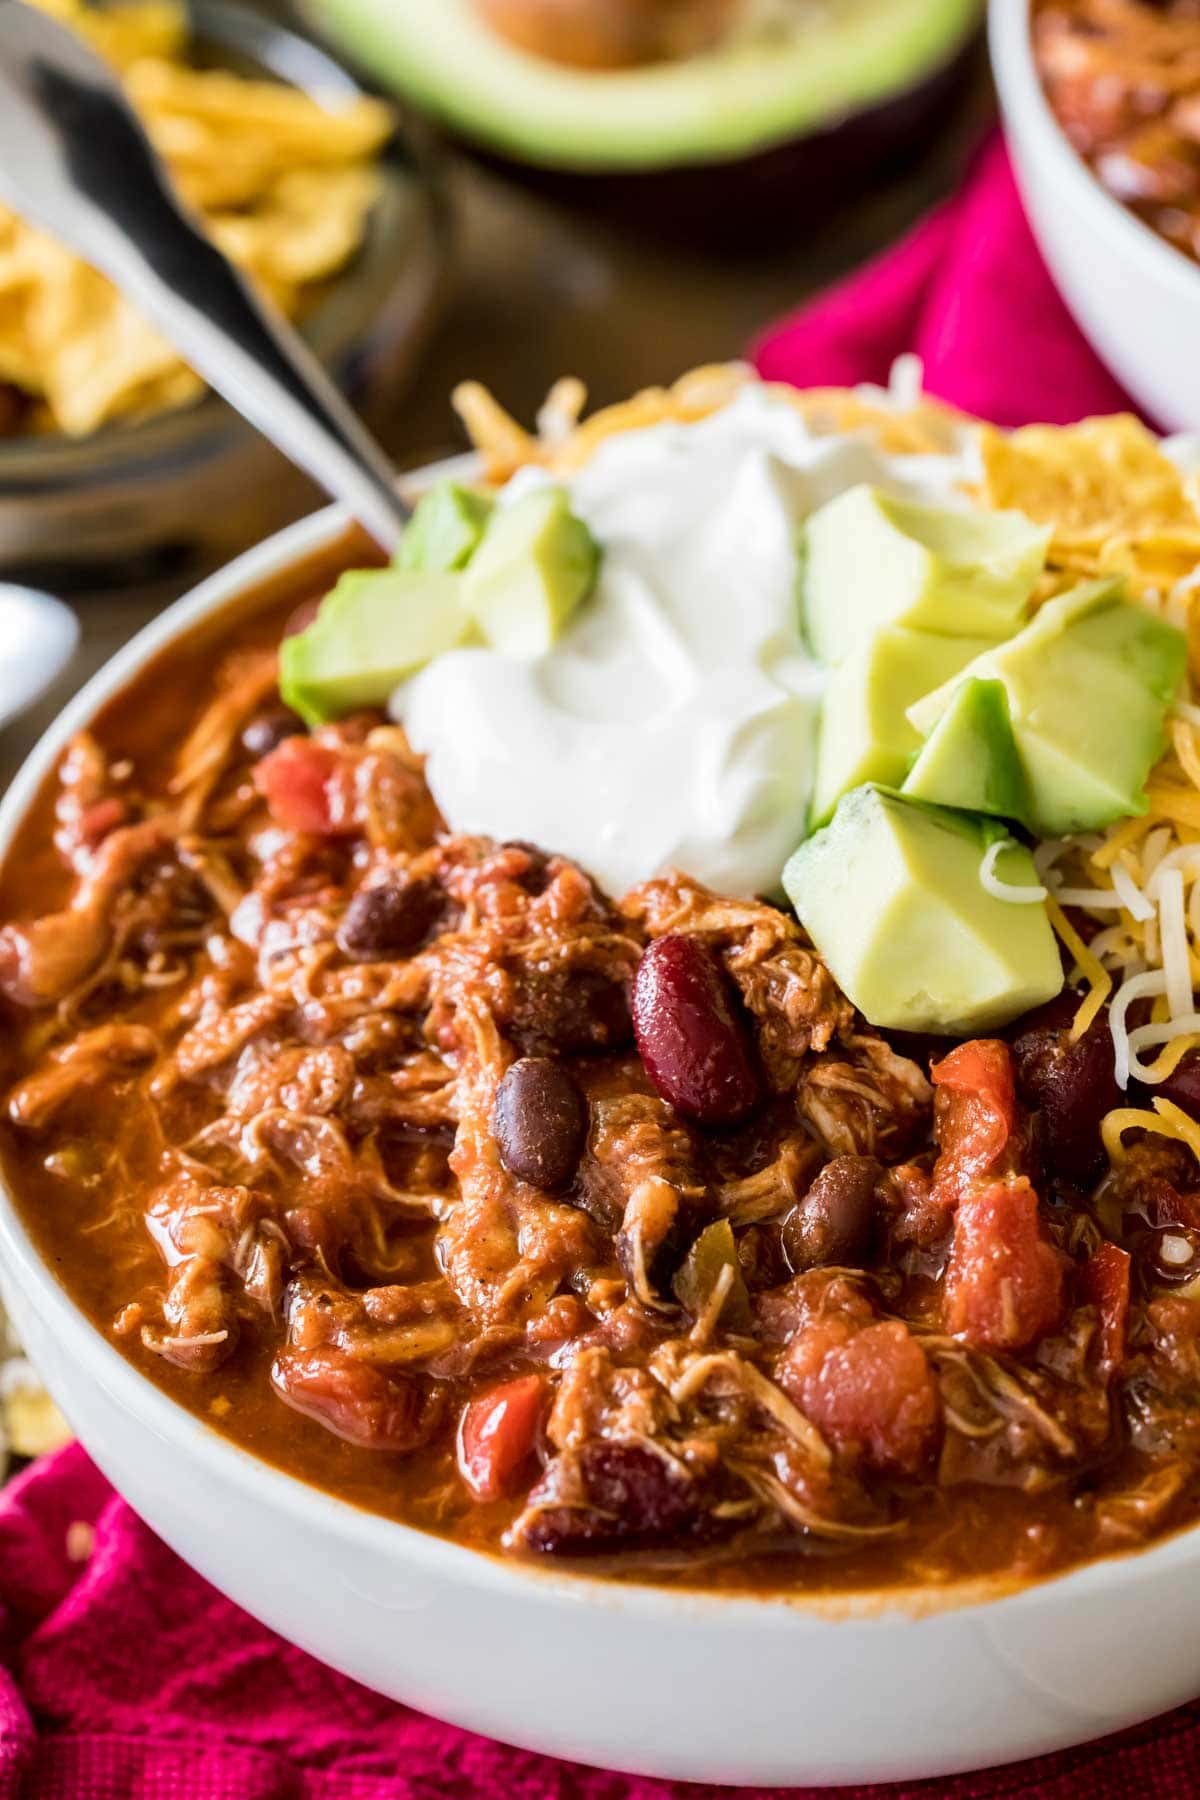 Bowl of chili topped with sour cream, avocado, and shredded cheese.